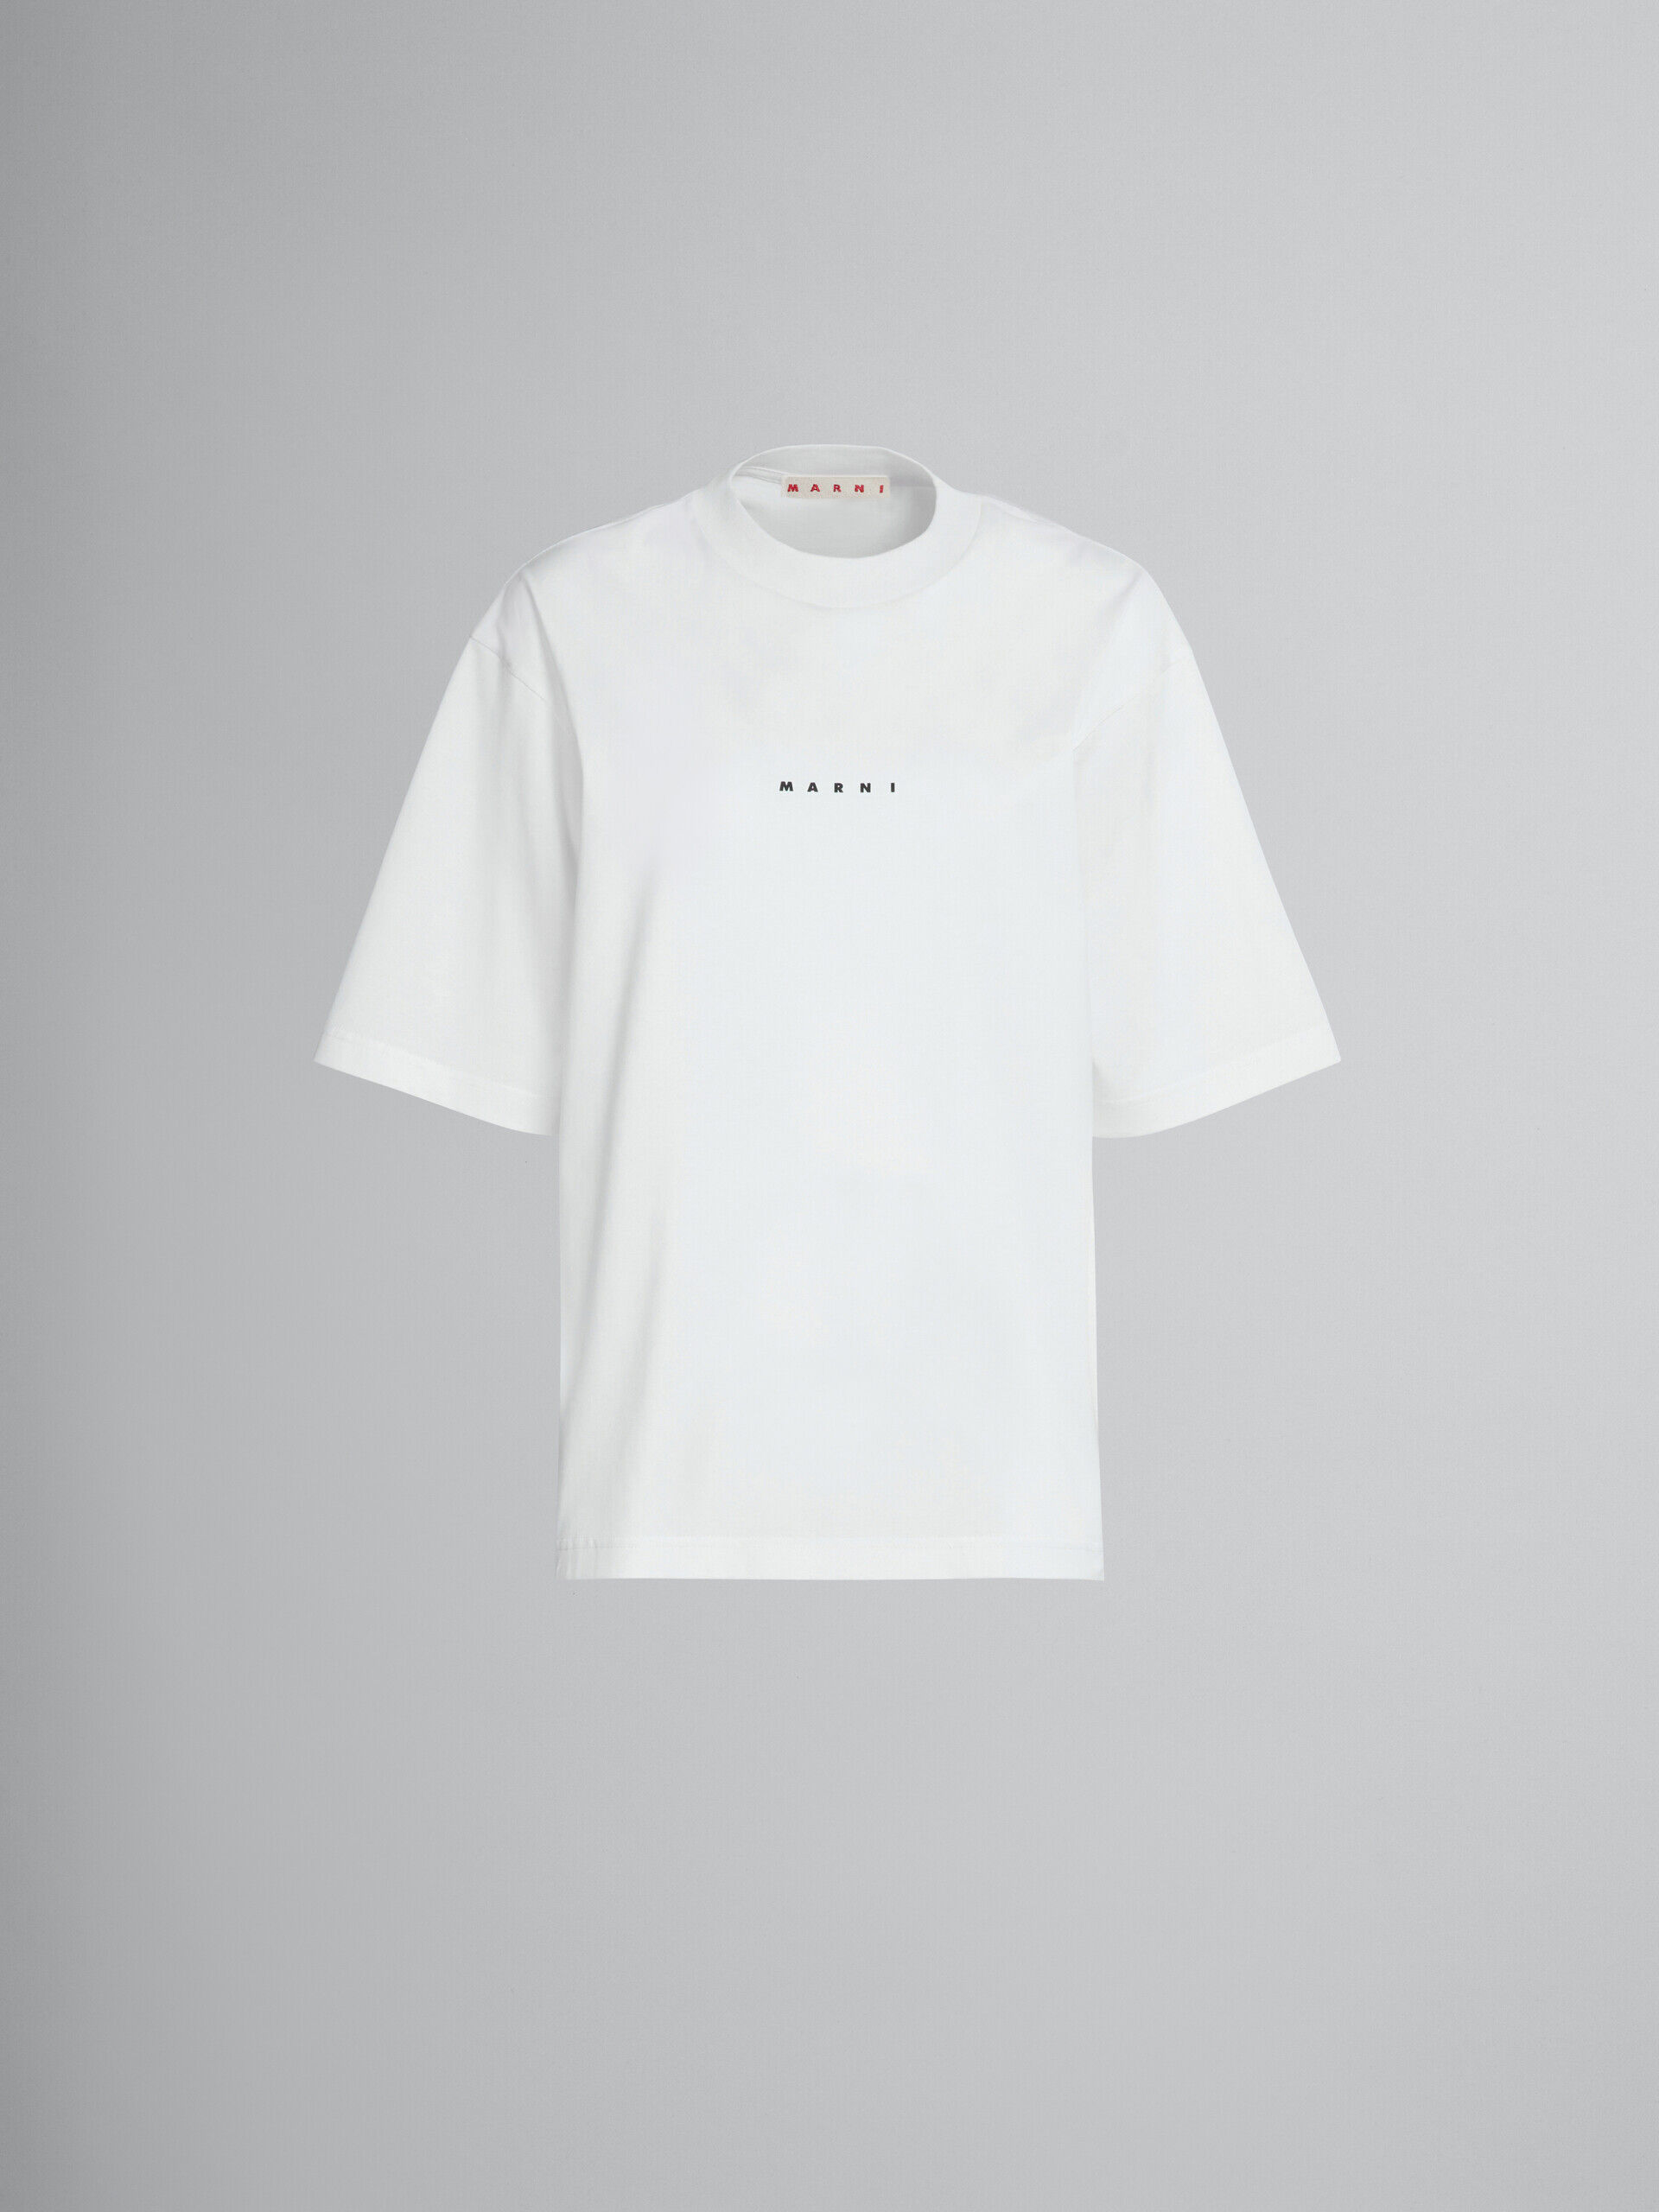 T-shirt in white organic cotton with logo | Marni